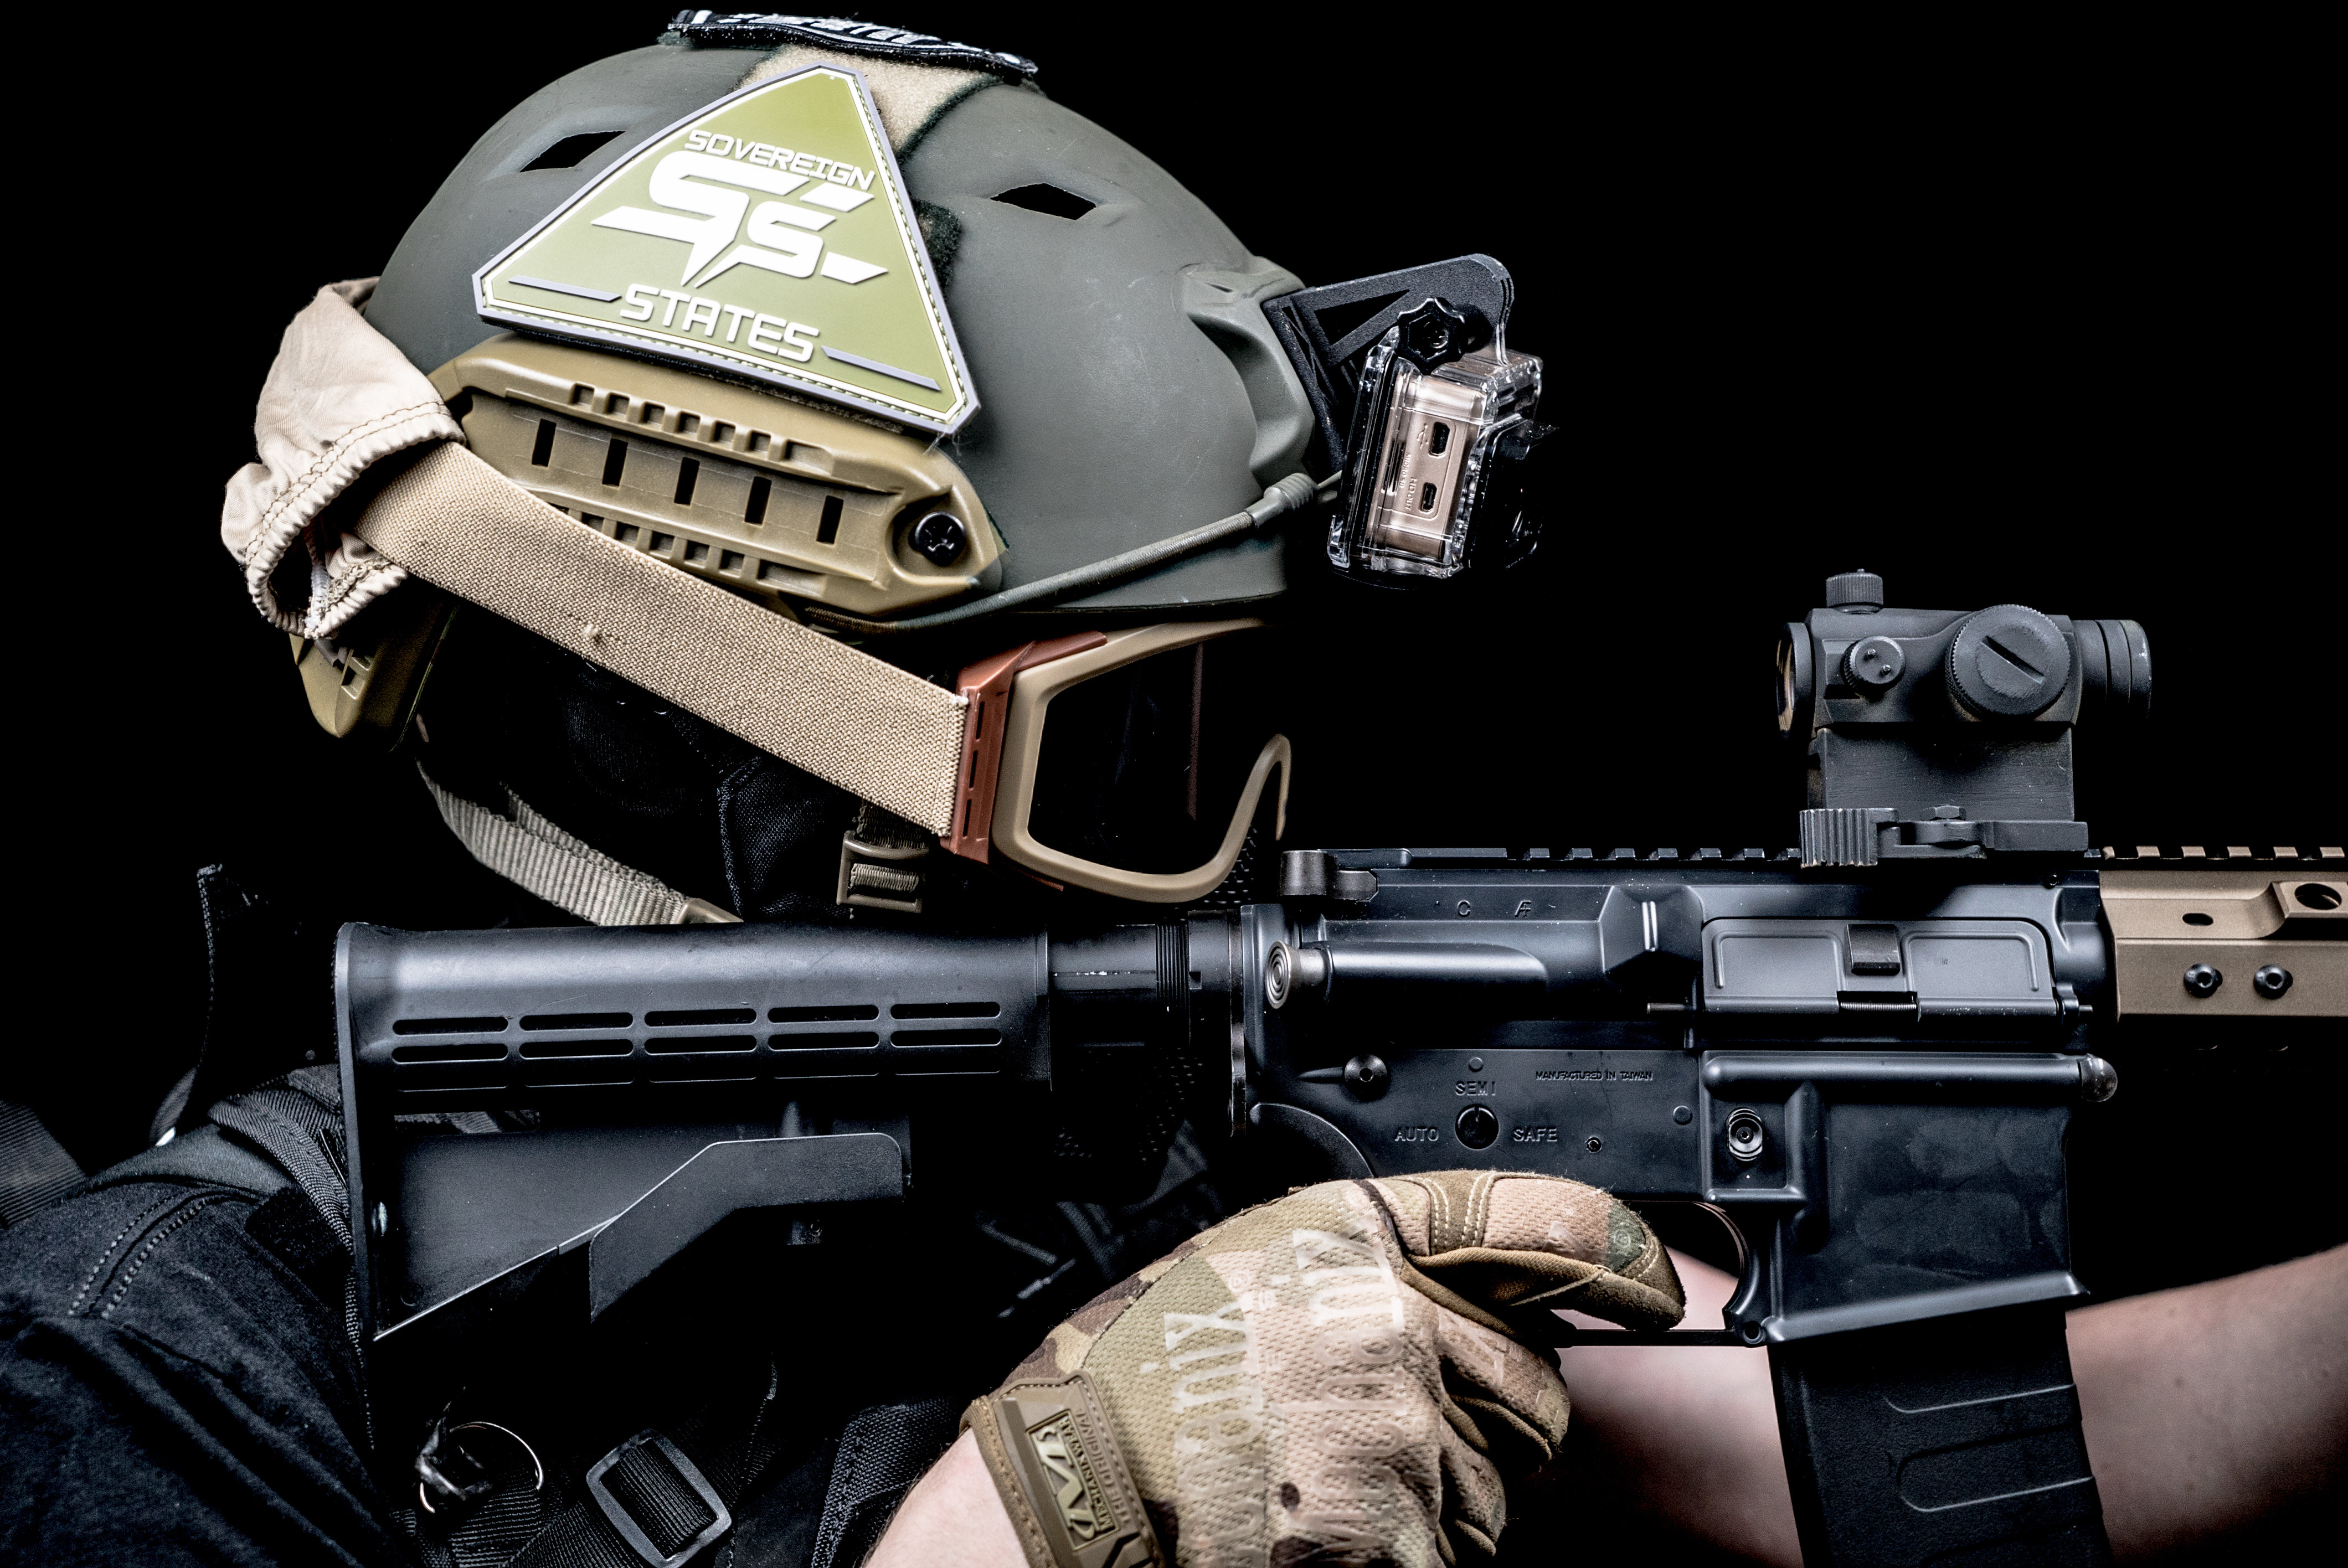 The best airsoft gear from Valken Airsoft!